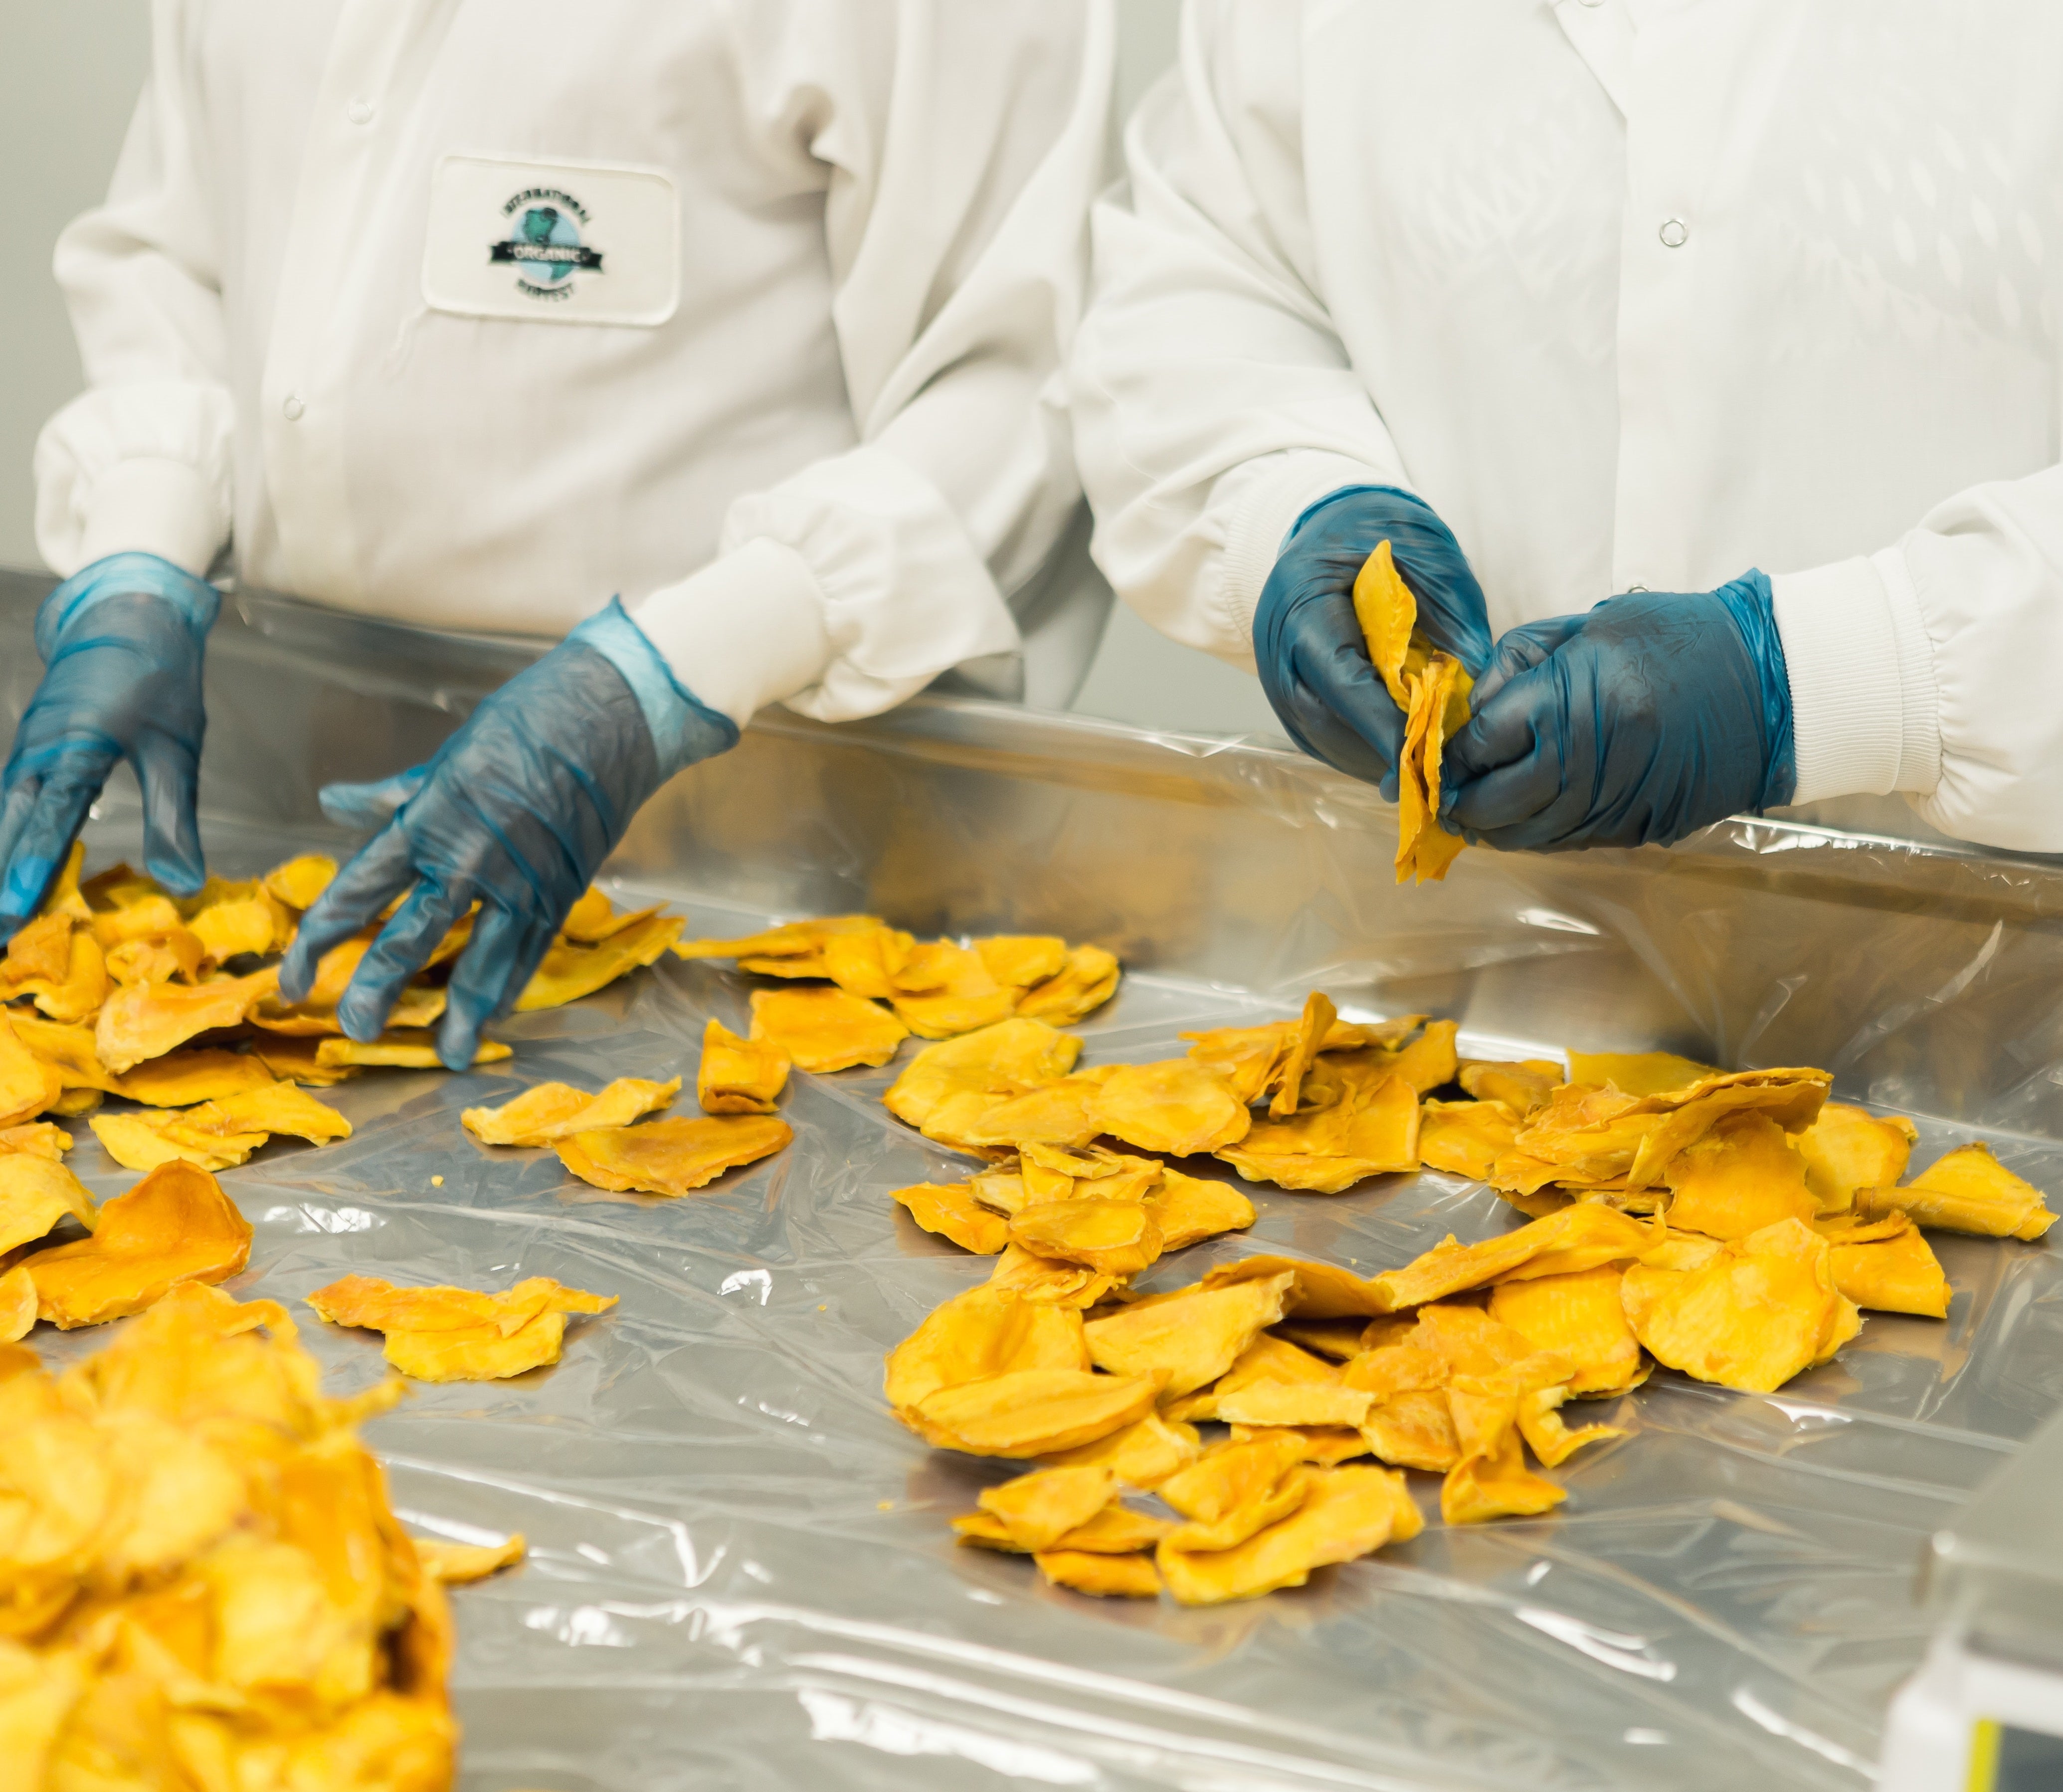 food handlers in white coats and blue rubber gloves separating pieces of dried fruit.